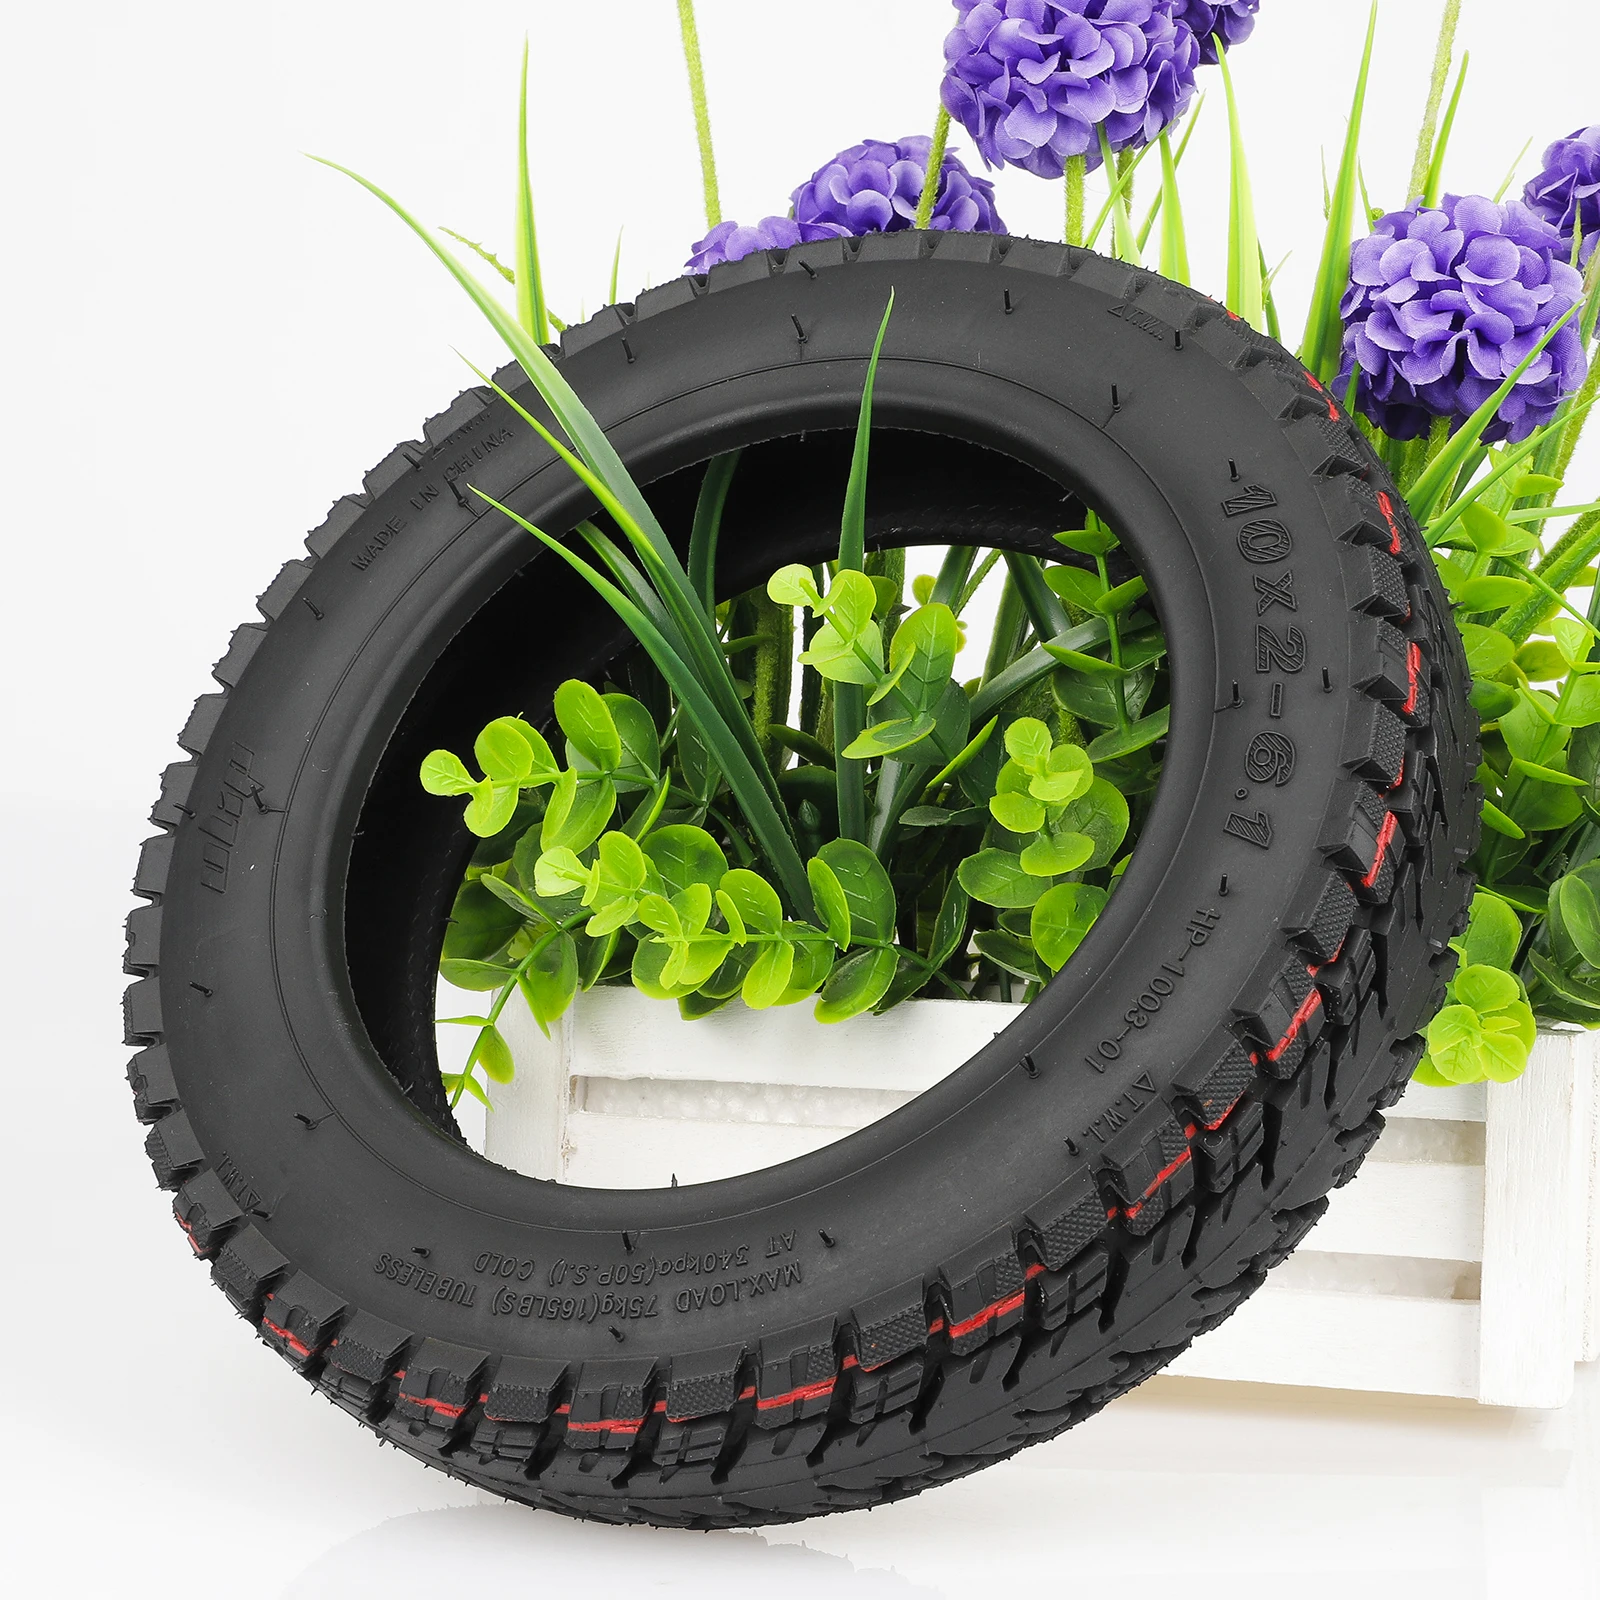 

Ulip 10 Inch Electric Scooter Self-Repairing Tire 10x2-6.1 Off-Road Tubeless Tire Vacuum Tire for M365 Pro Pro2 1S MI3 Lite